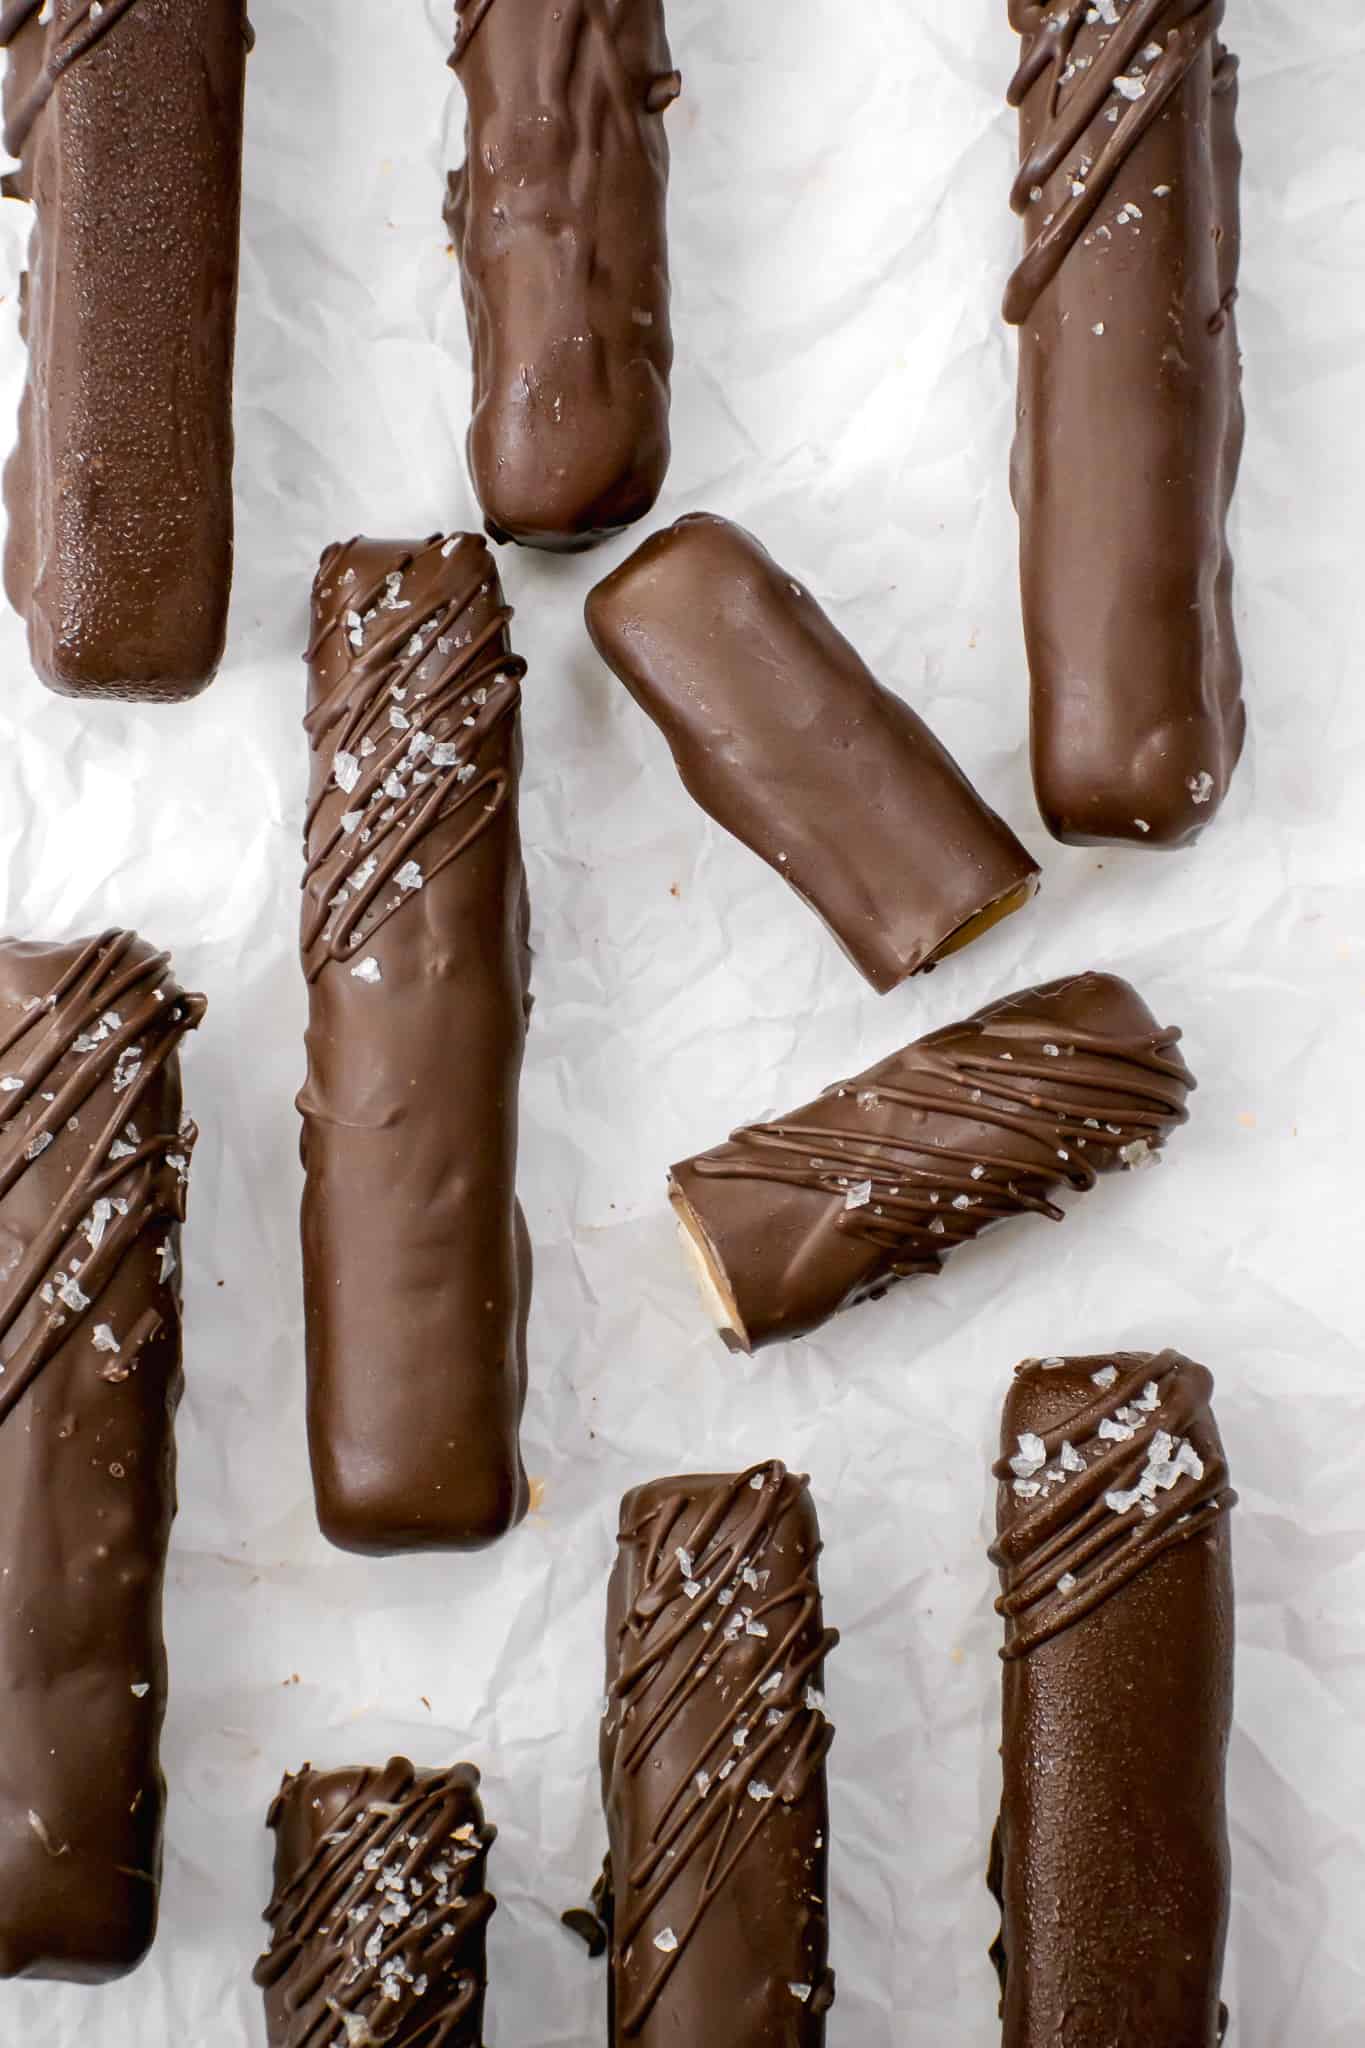 homemade twix bars on parchment paper.